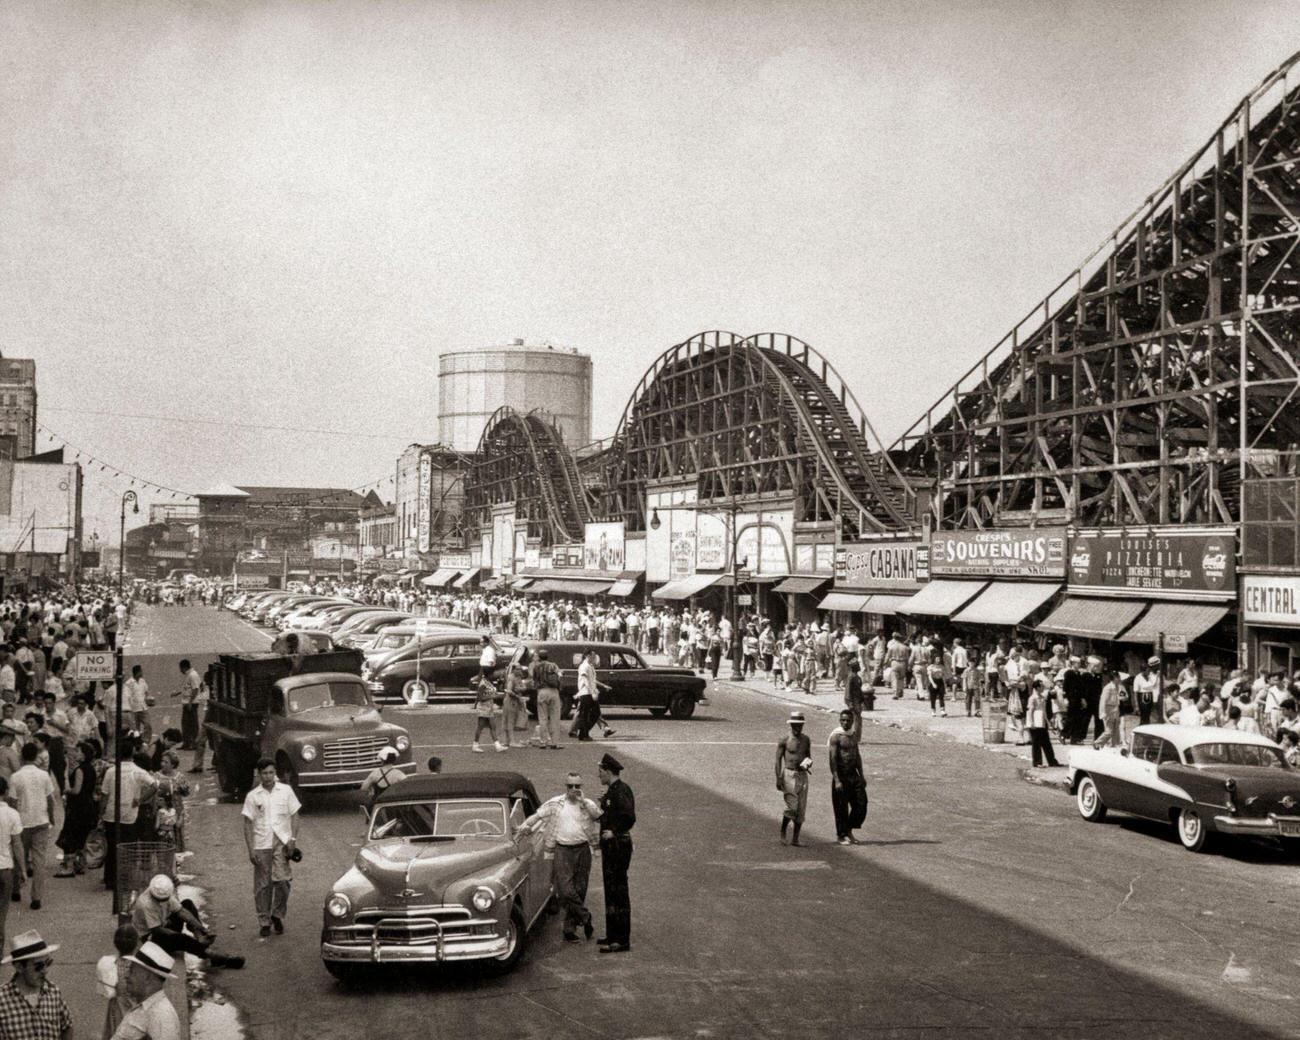 Crowded Streets And Parked Cars Near Roller Coaster, 1950S